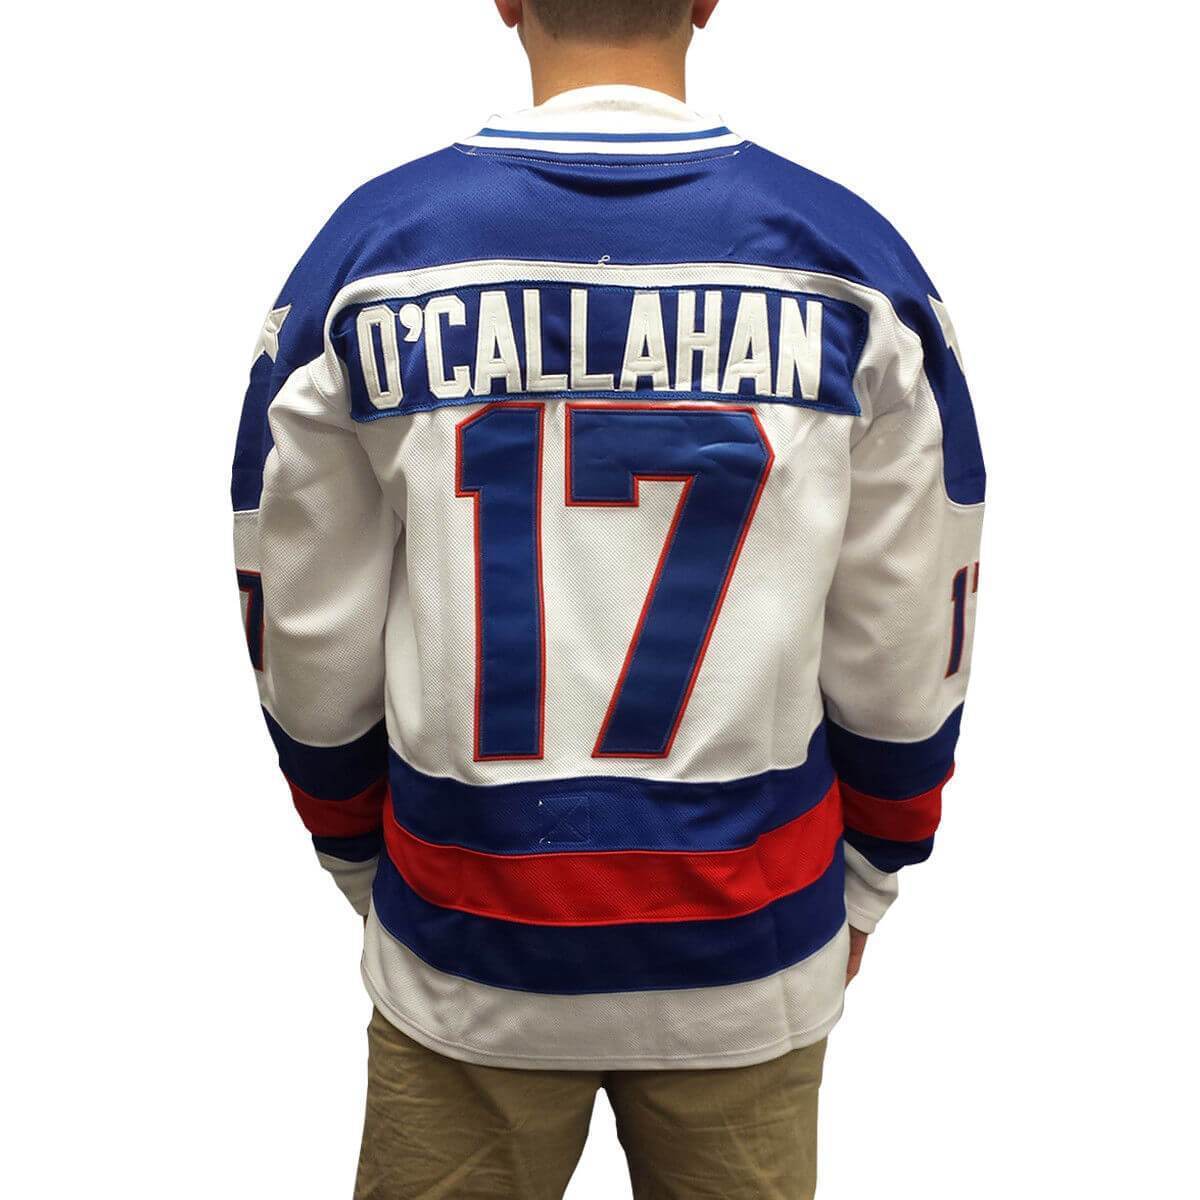 1980 Miracle On Ice Jack O'Callahan 17 USA Hockey Jersey White Blue - Jersey Champs white blue_gallery